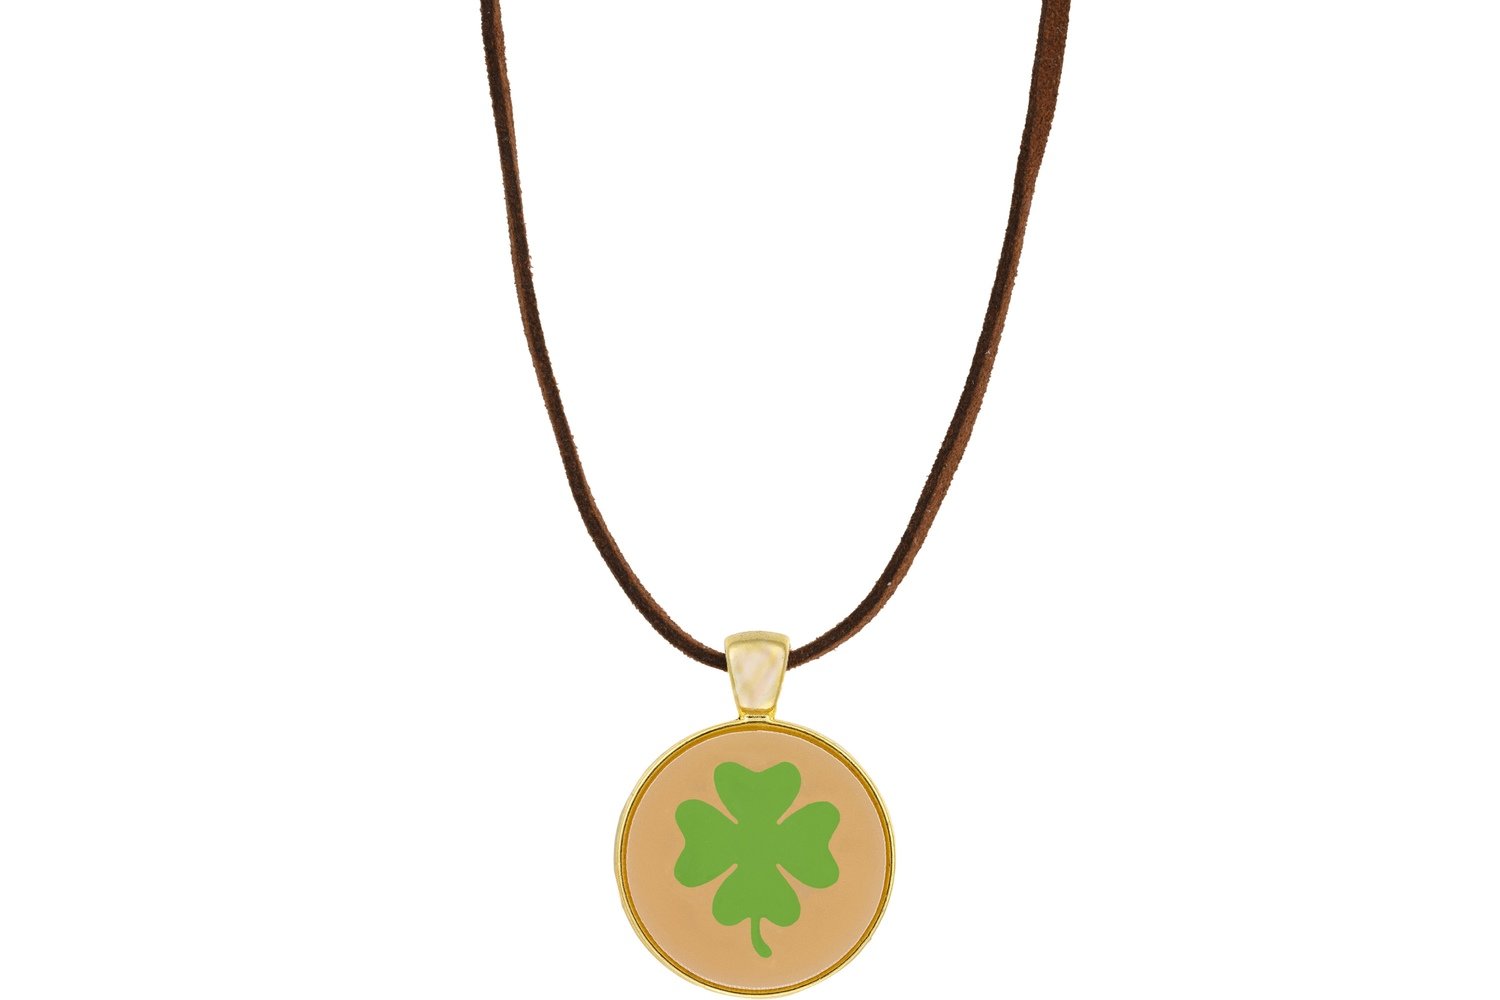 Clover Pendant Intricate Style on Suede Leather Cord Necklace